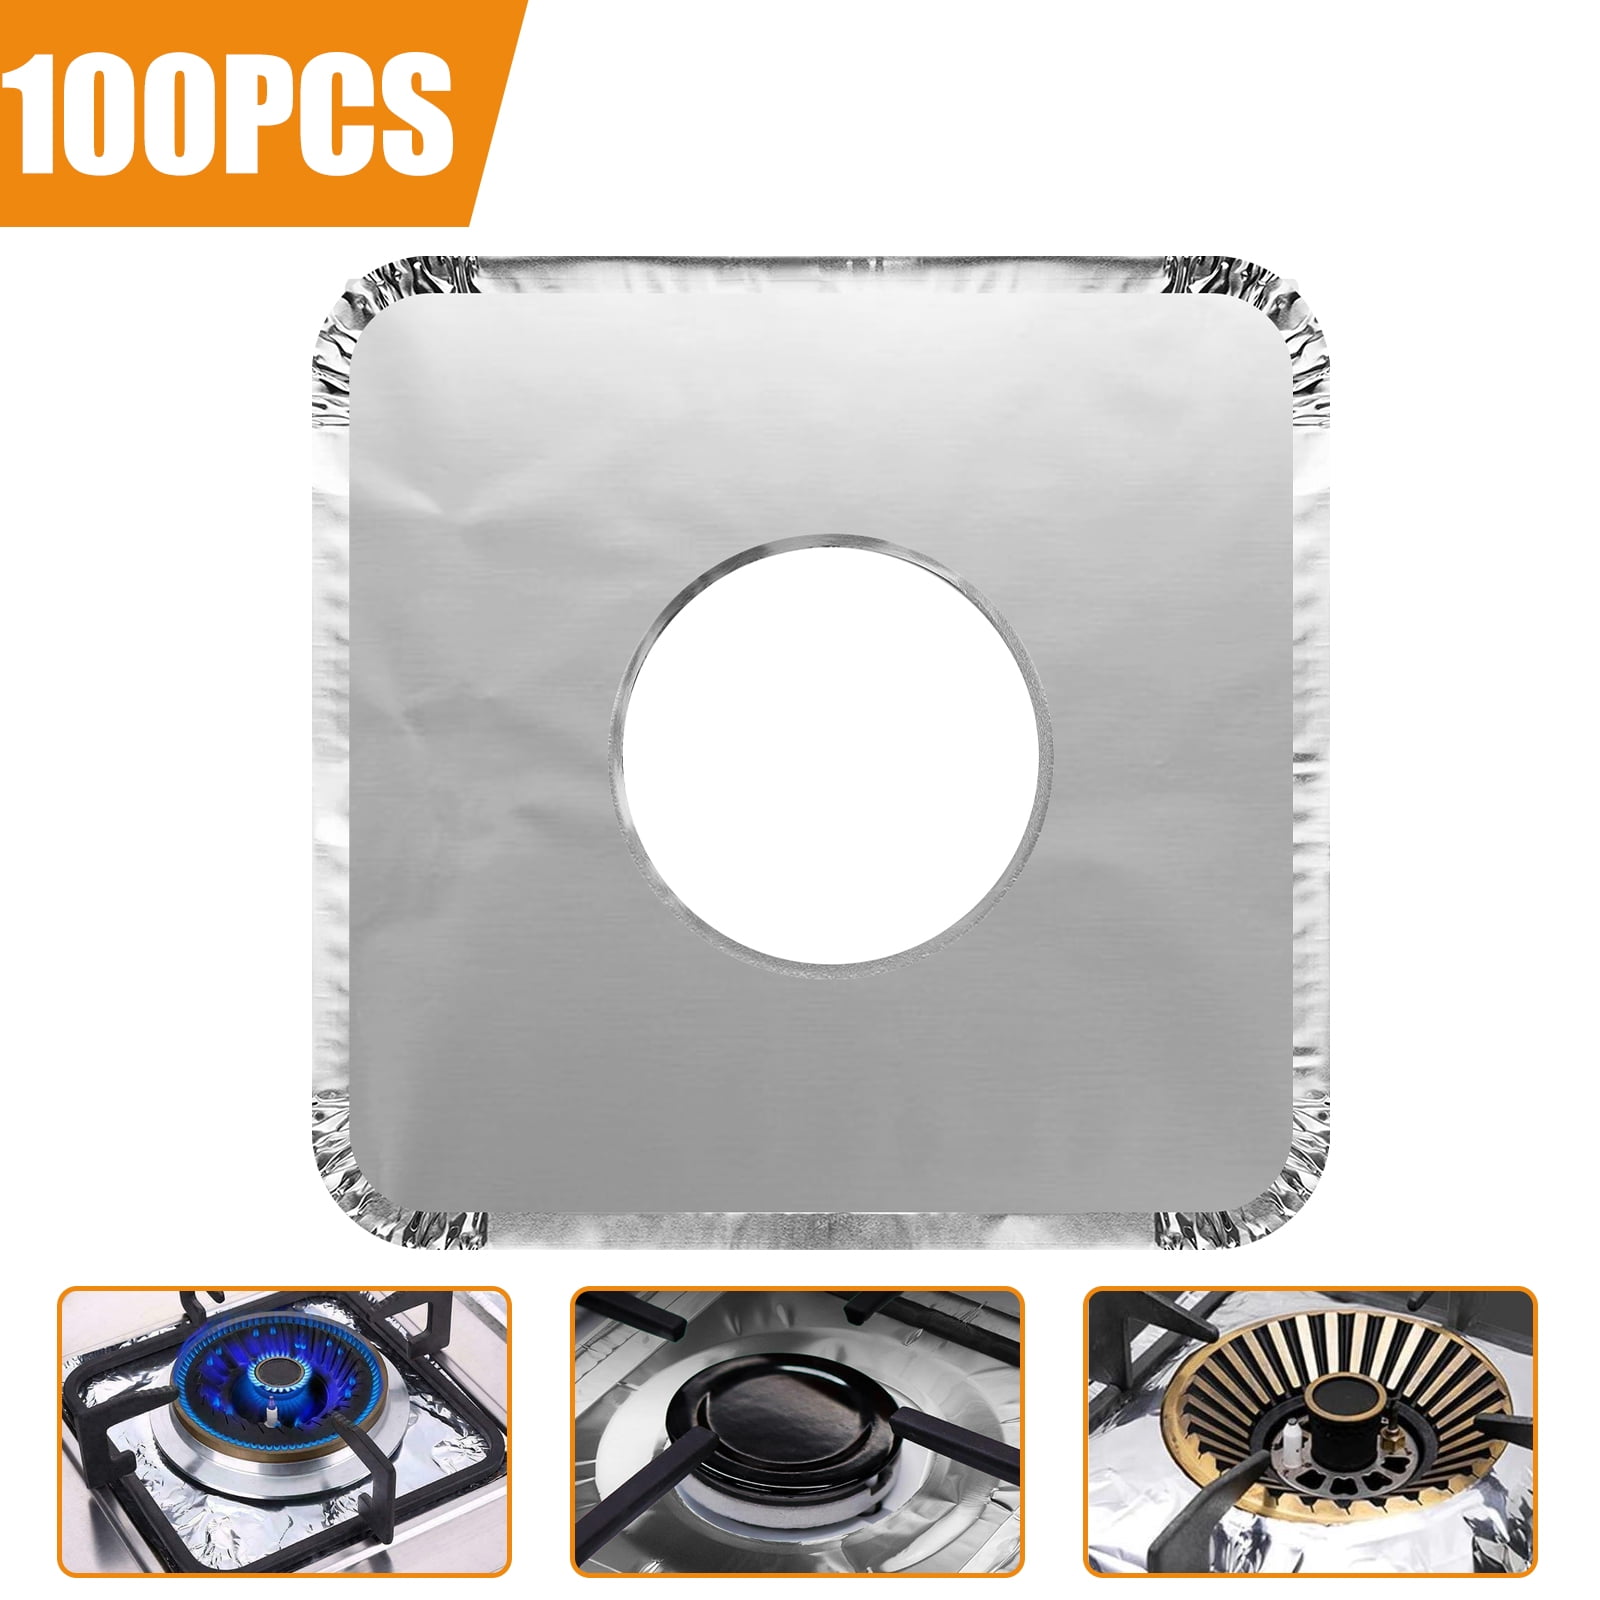 KitchenRaku Large Induction Cooktop Protector Mat 21.2x35.4 Inch, Magnetic  Electric Stove Covers Antistrike & Antiscratch Glass Top Stove Cover